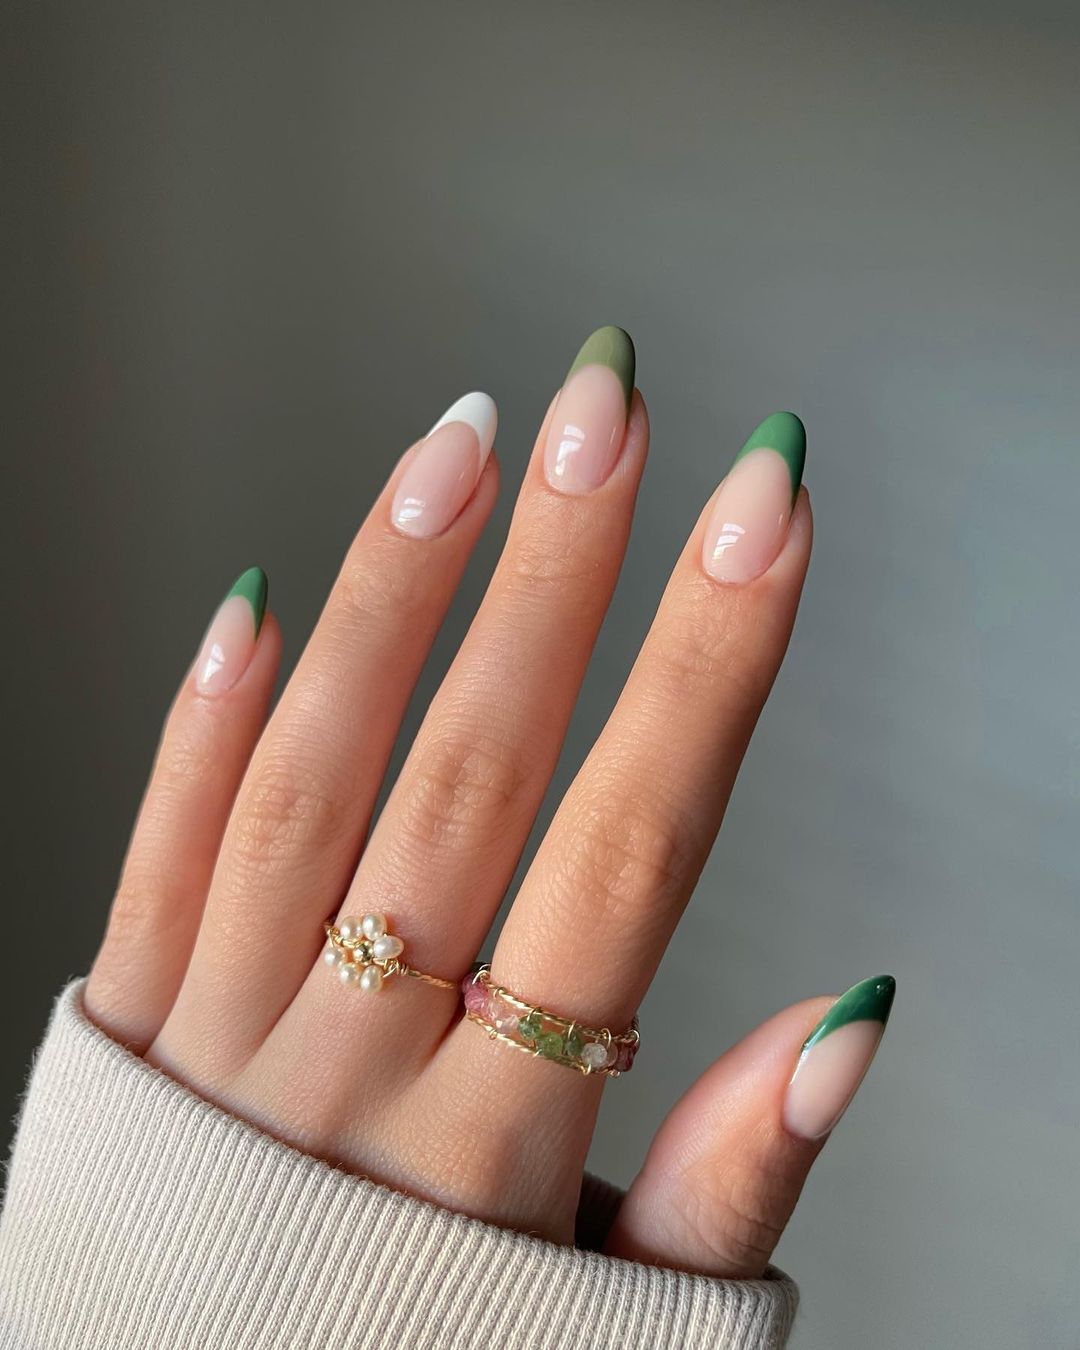 Green and White Nails